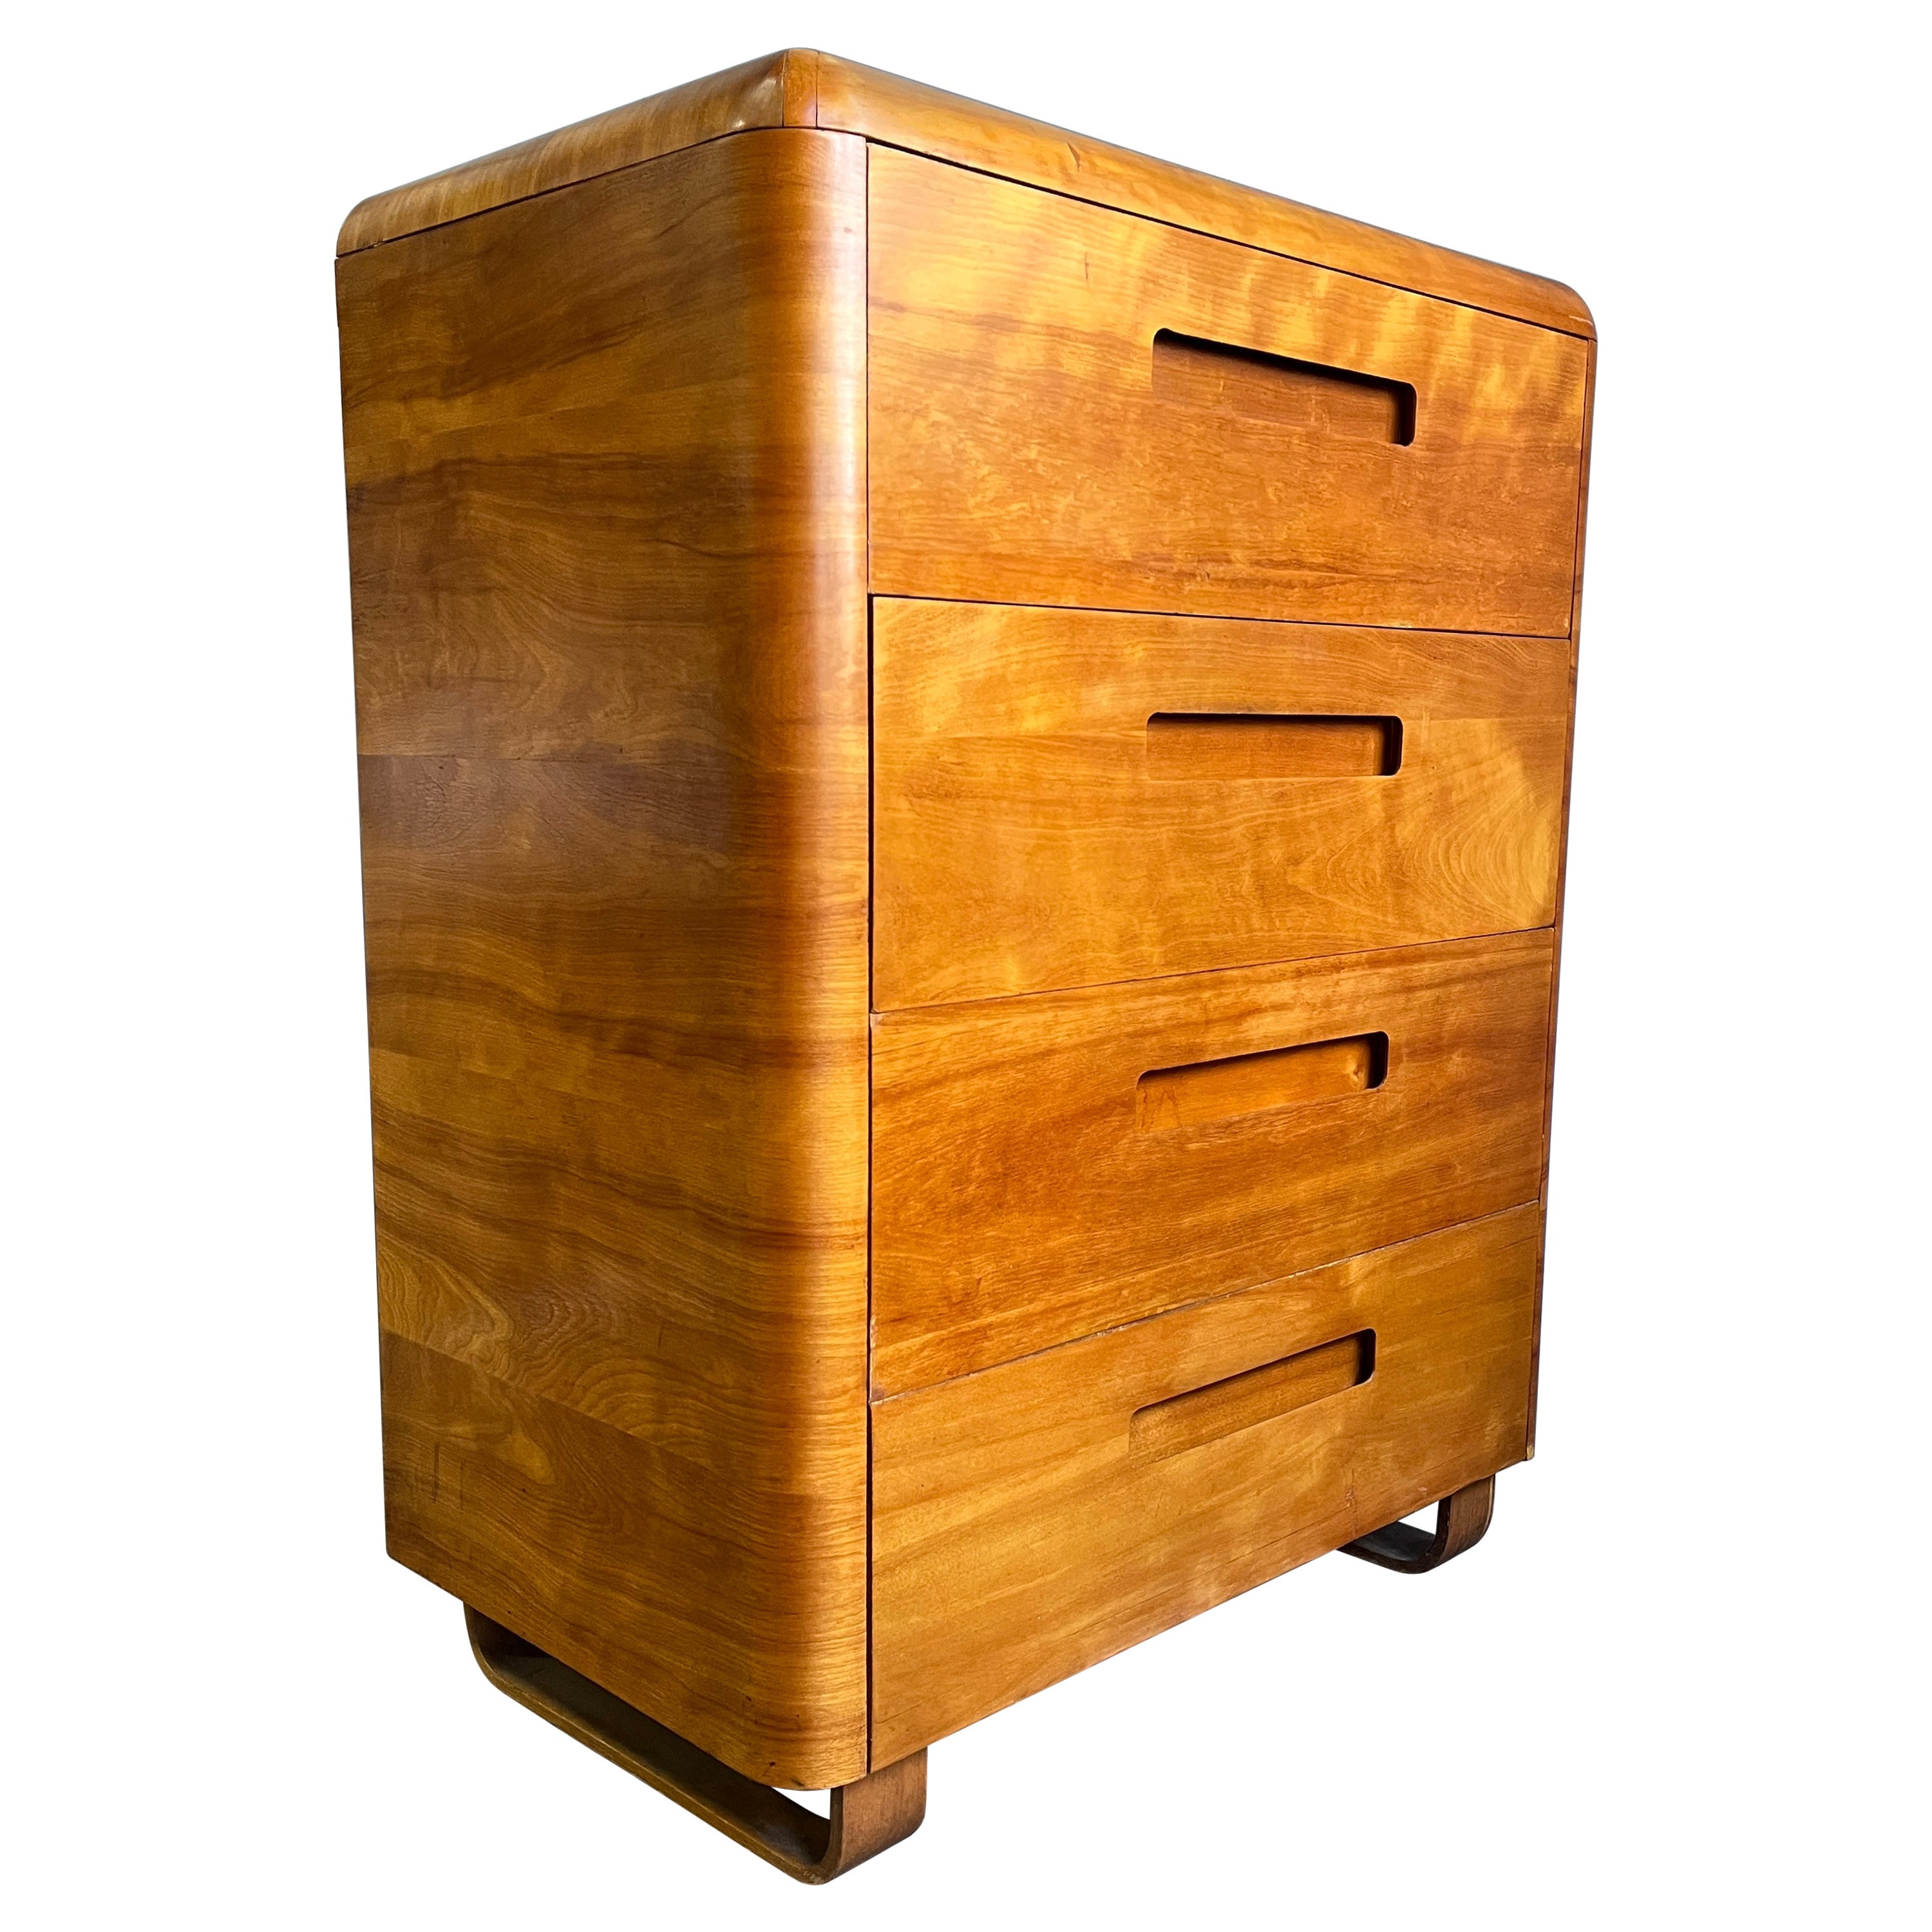 Beautiful shimmering birchwood 4 drawer dresser on sled base. Produced by Plymold for just a few years before founding Plycraft. Paul Goldman designed most of Plycraft furniture including the iconic Cherner Pretzel chair as well as designing for